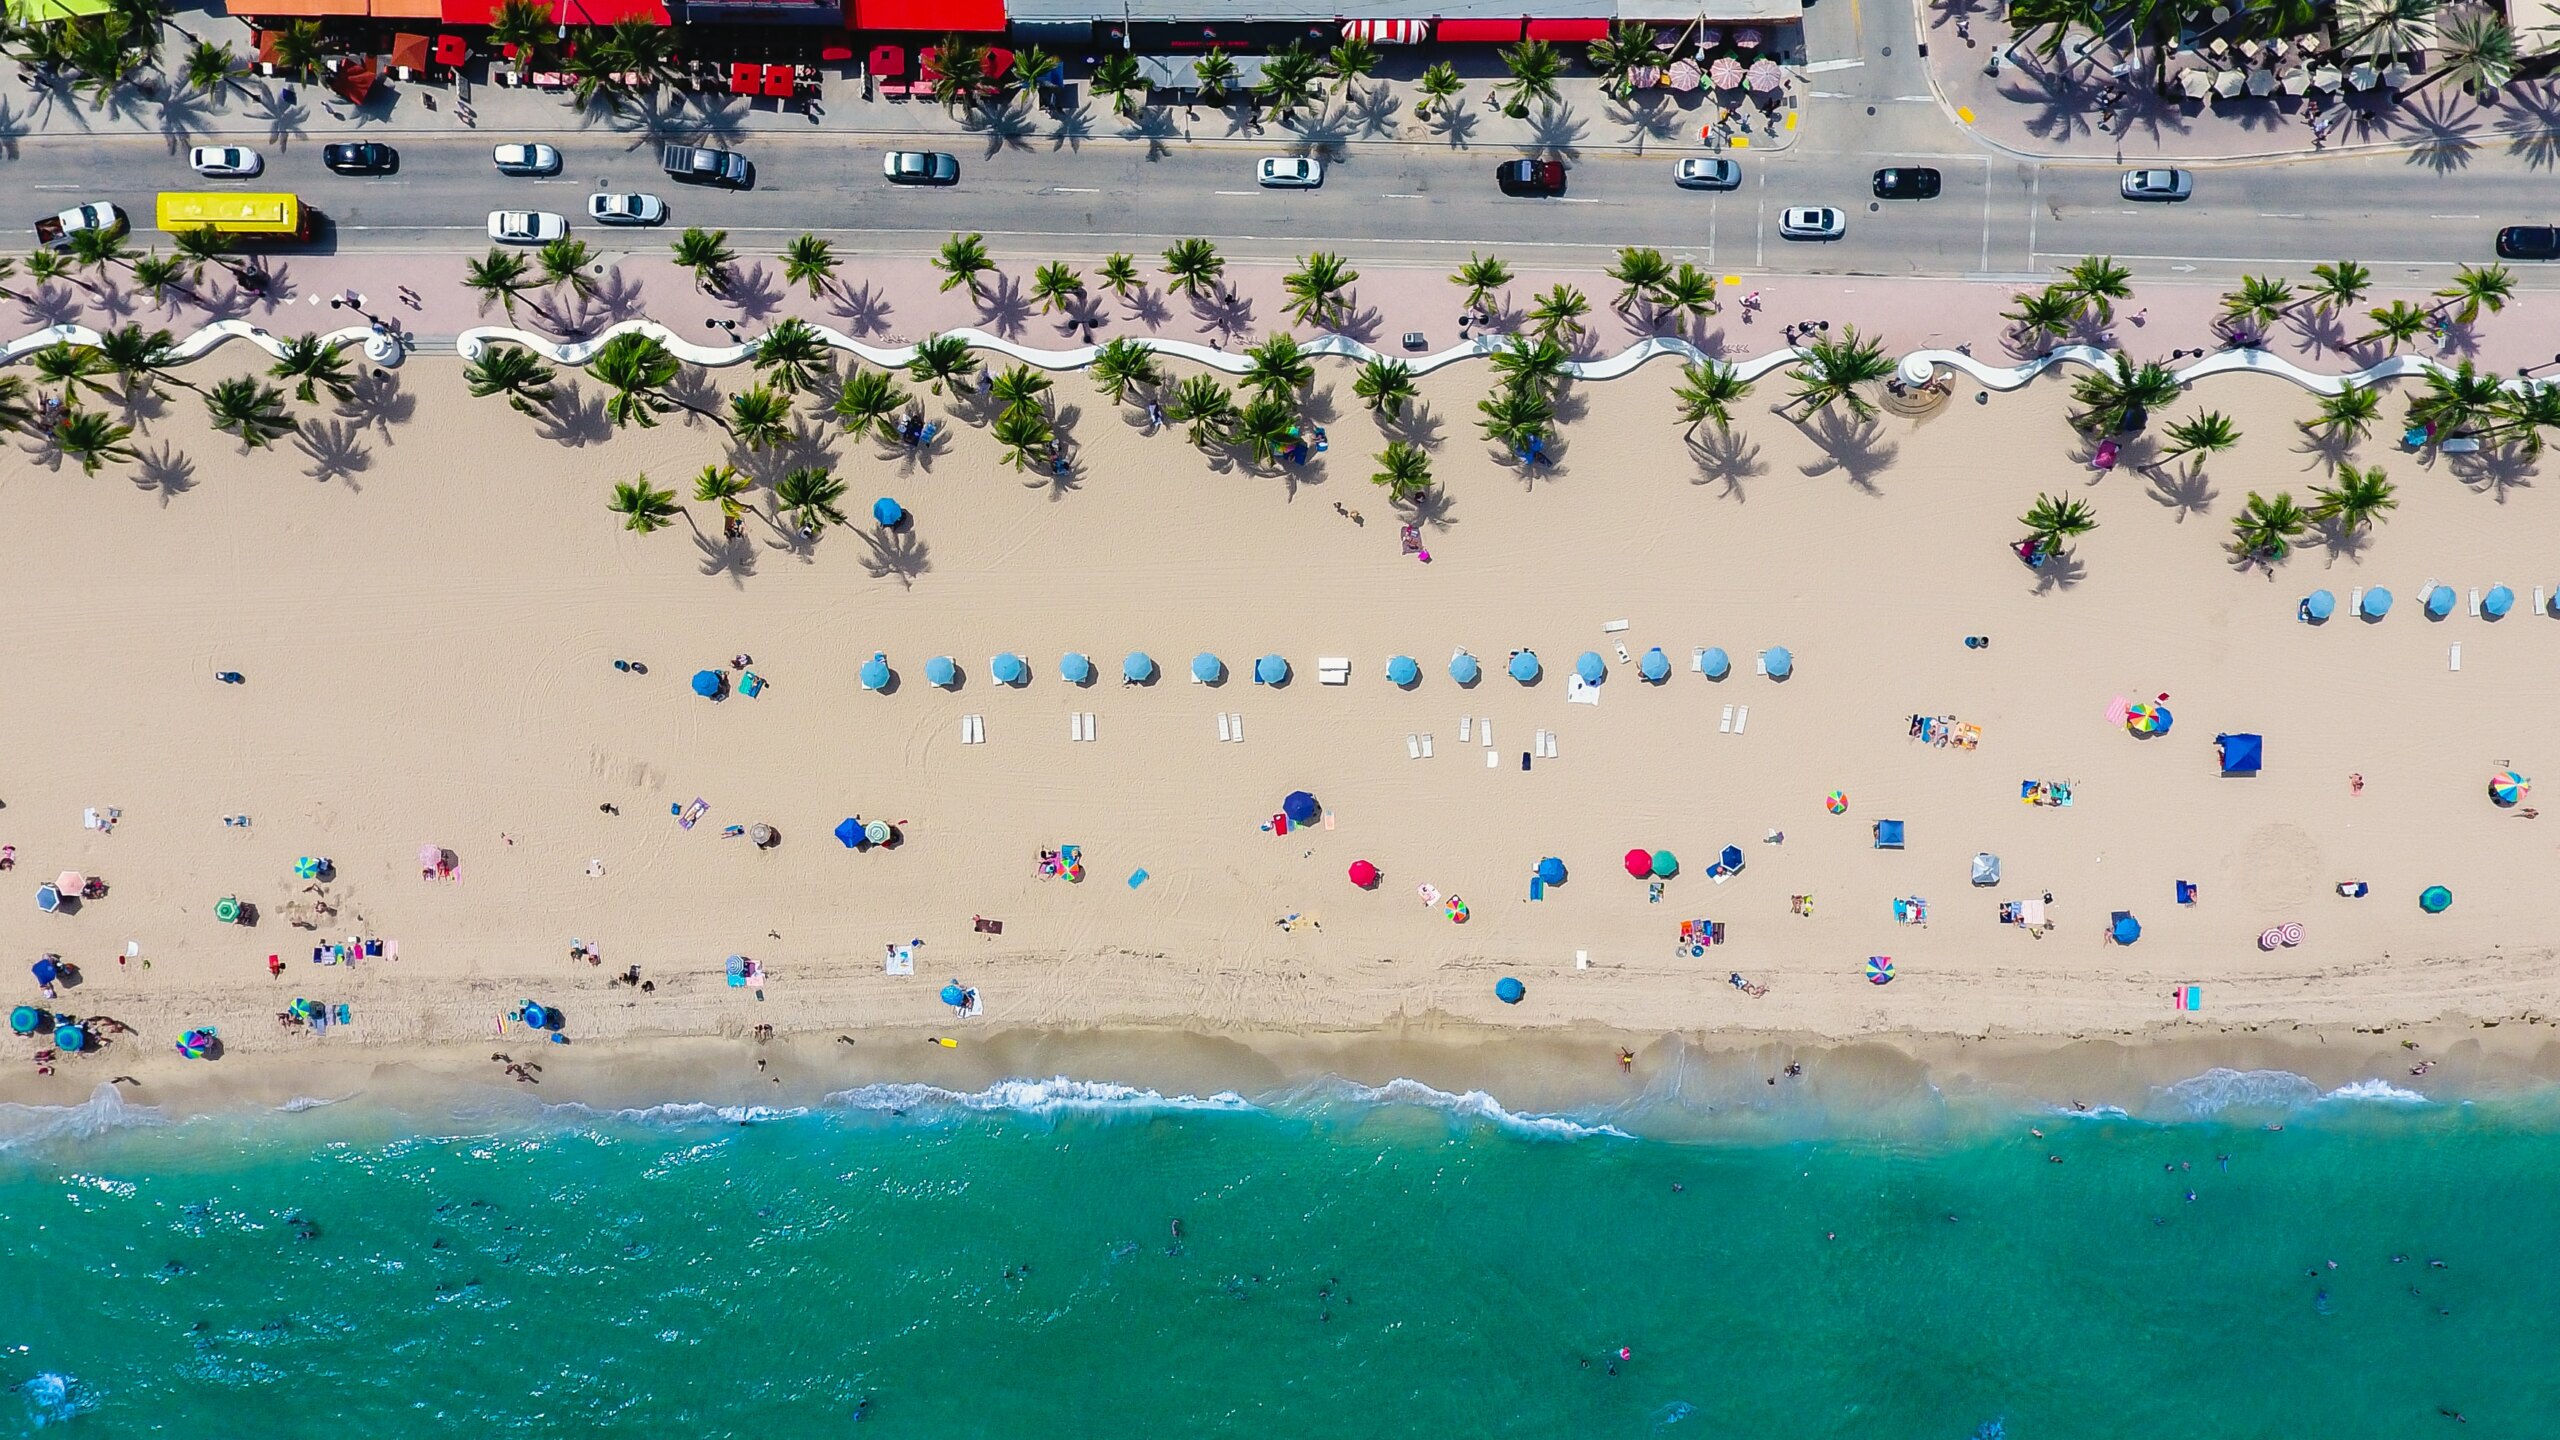 Overhead view of a busy beach.